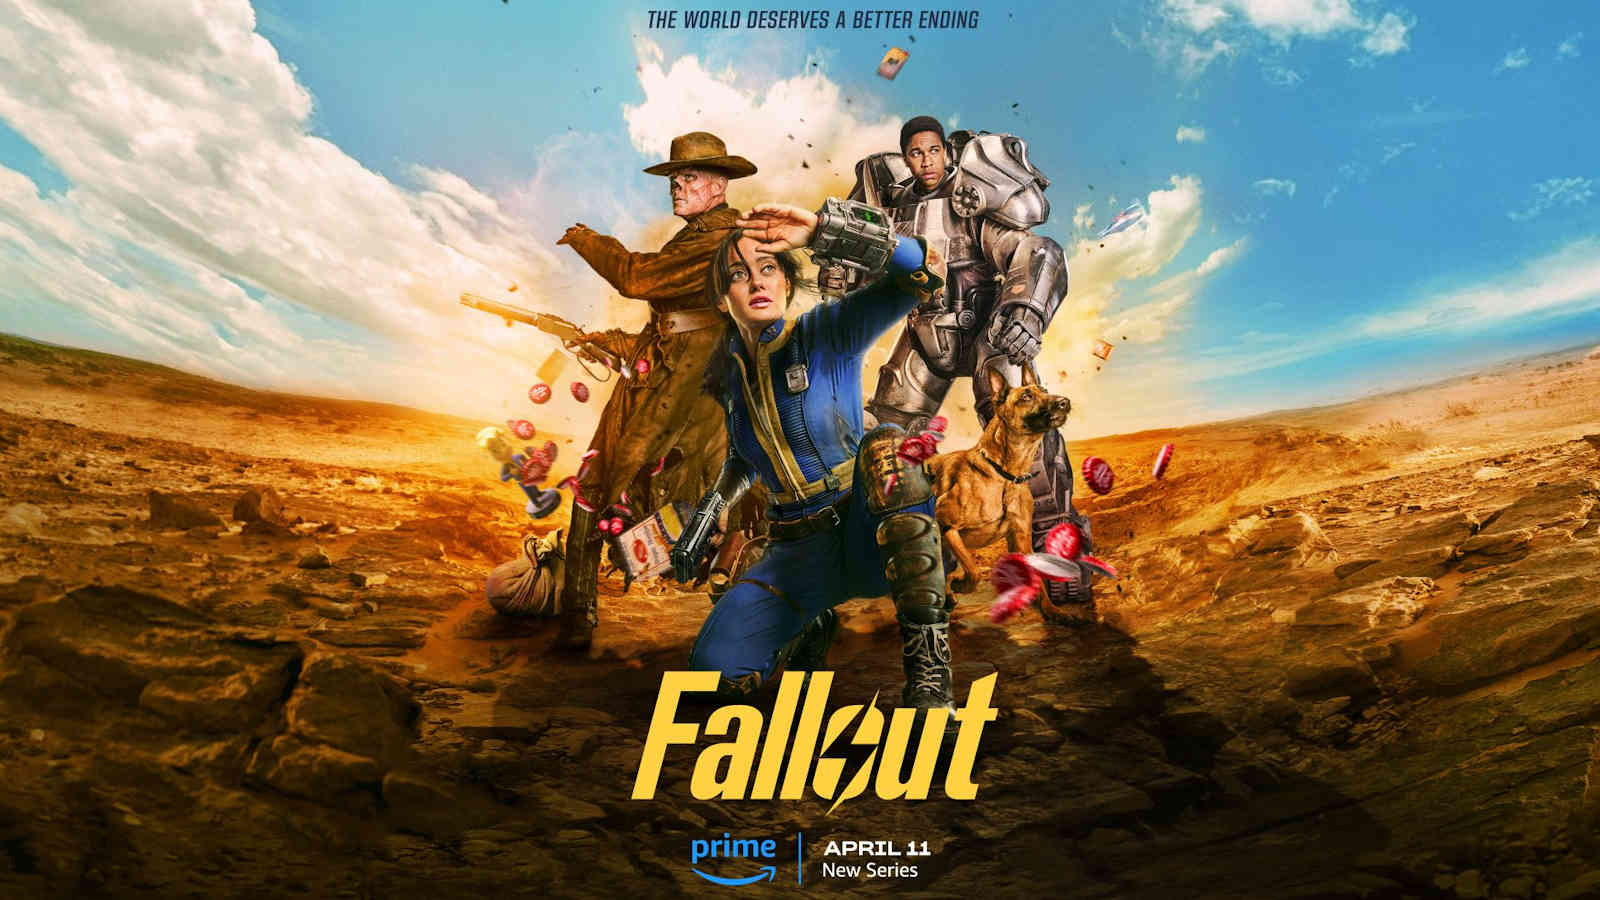 Fallout TV Series release